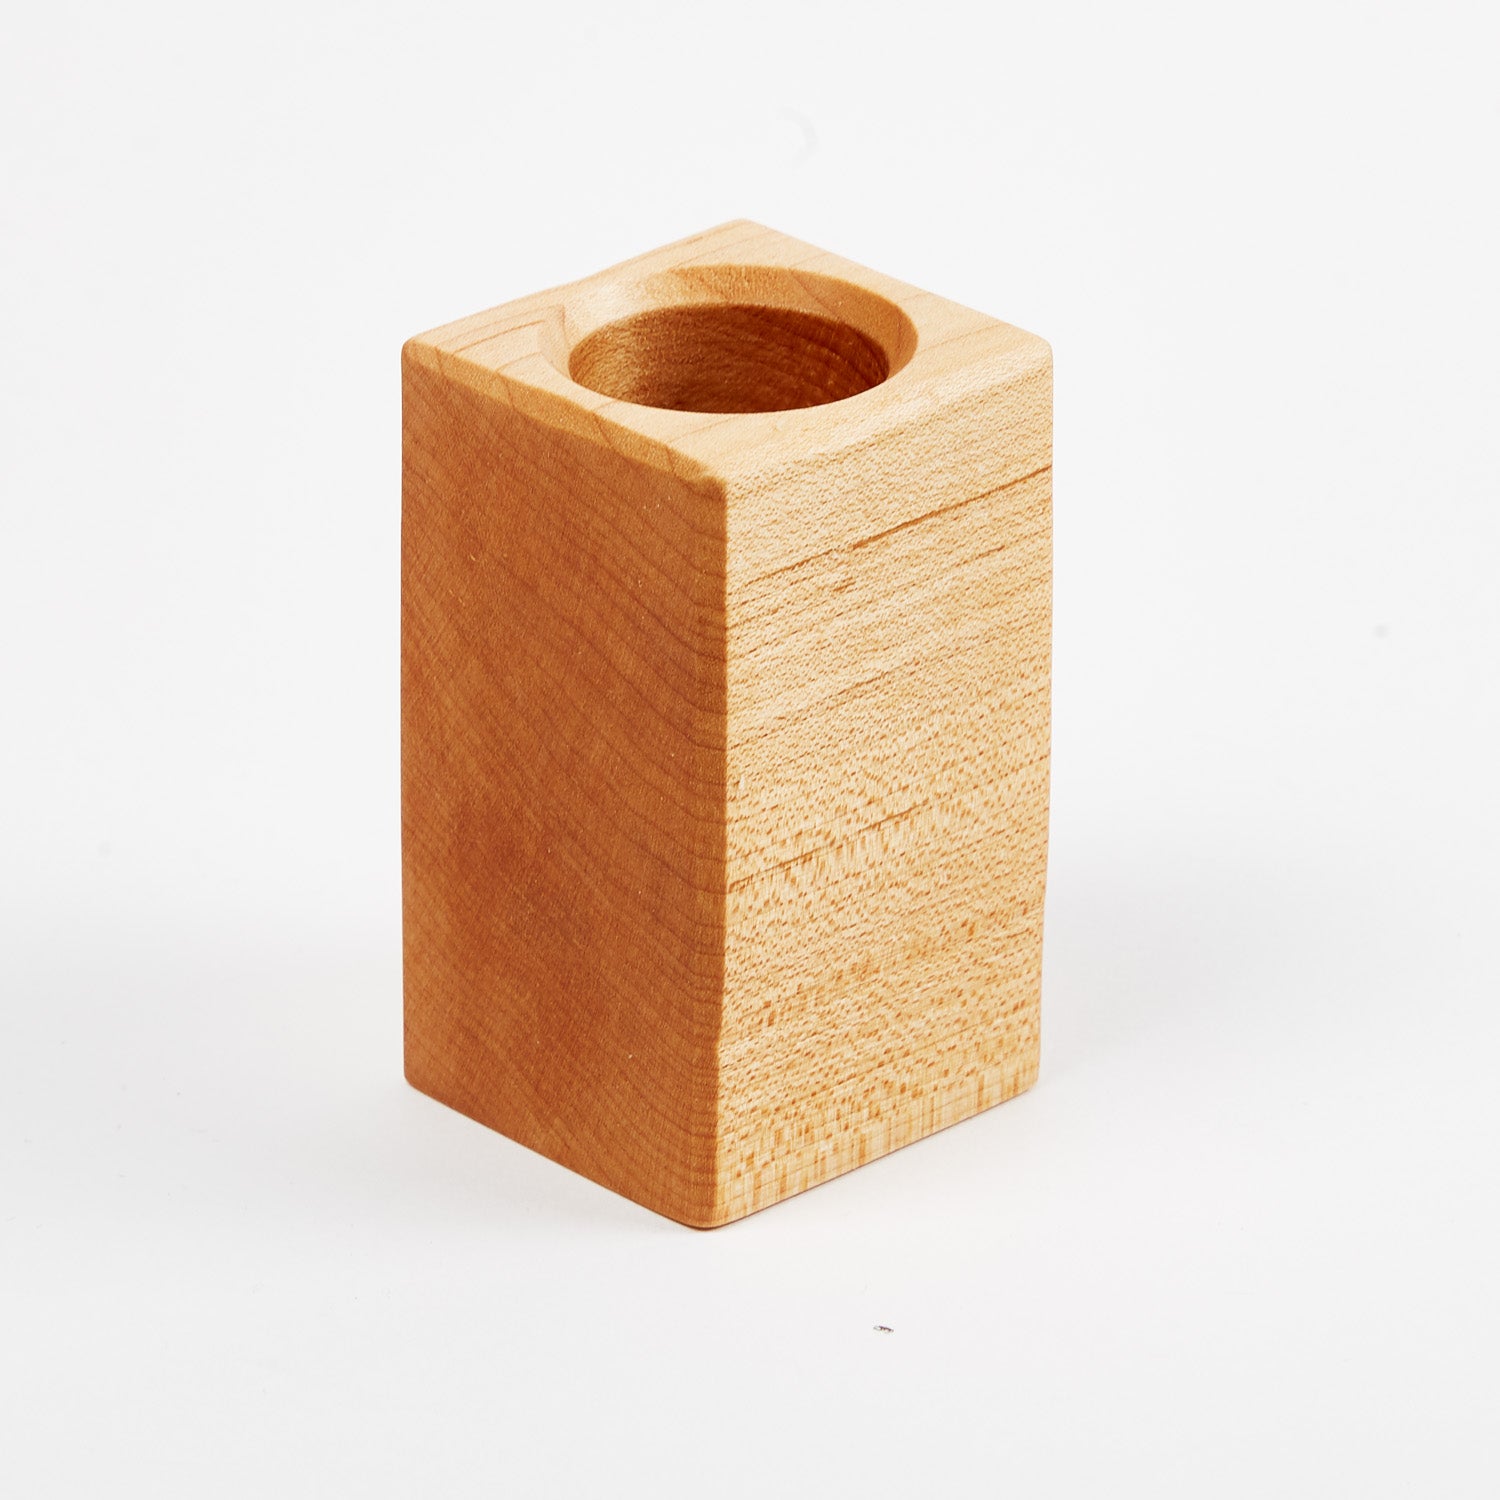 A KirbyAllison.com Small Wooden Cube on a white background.